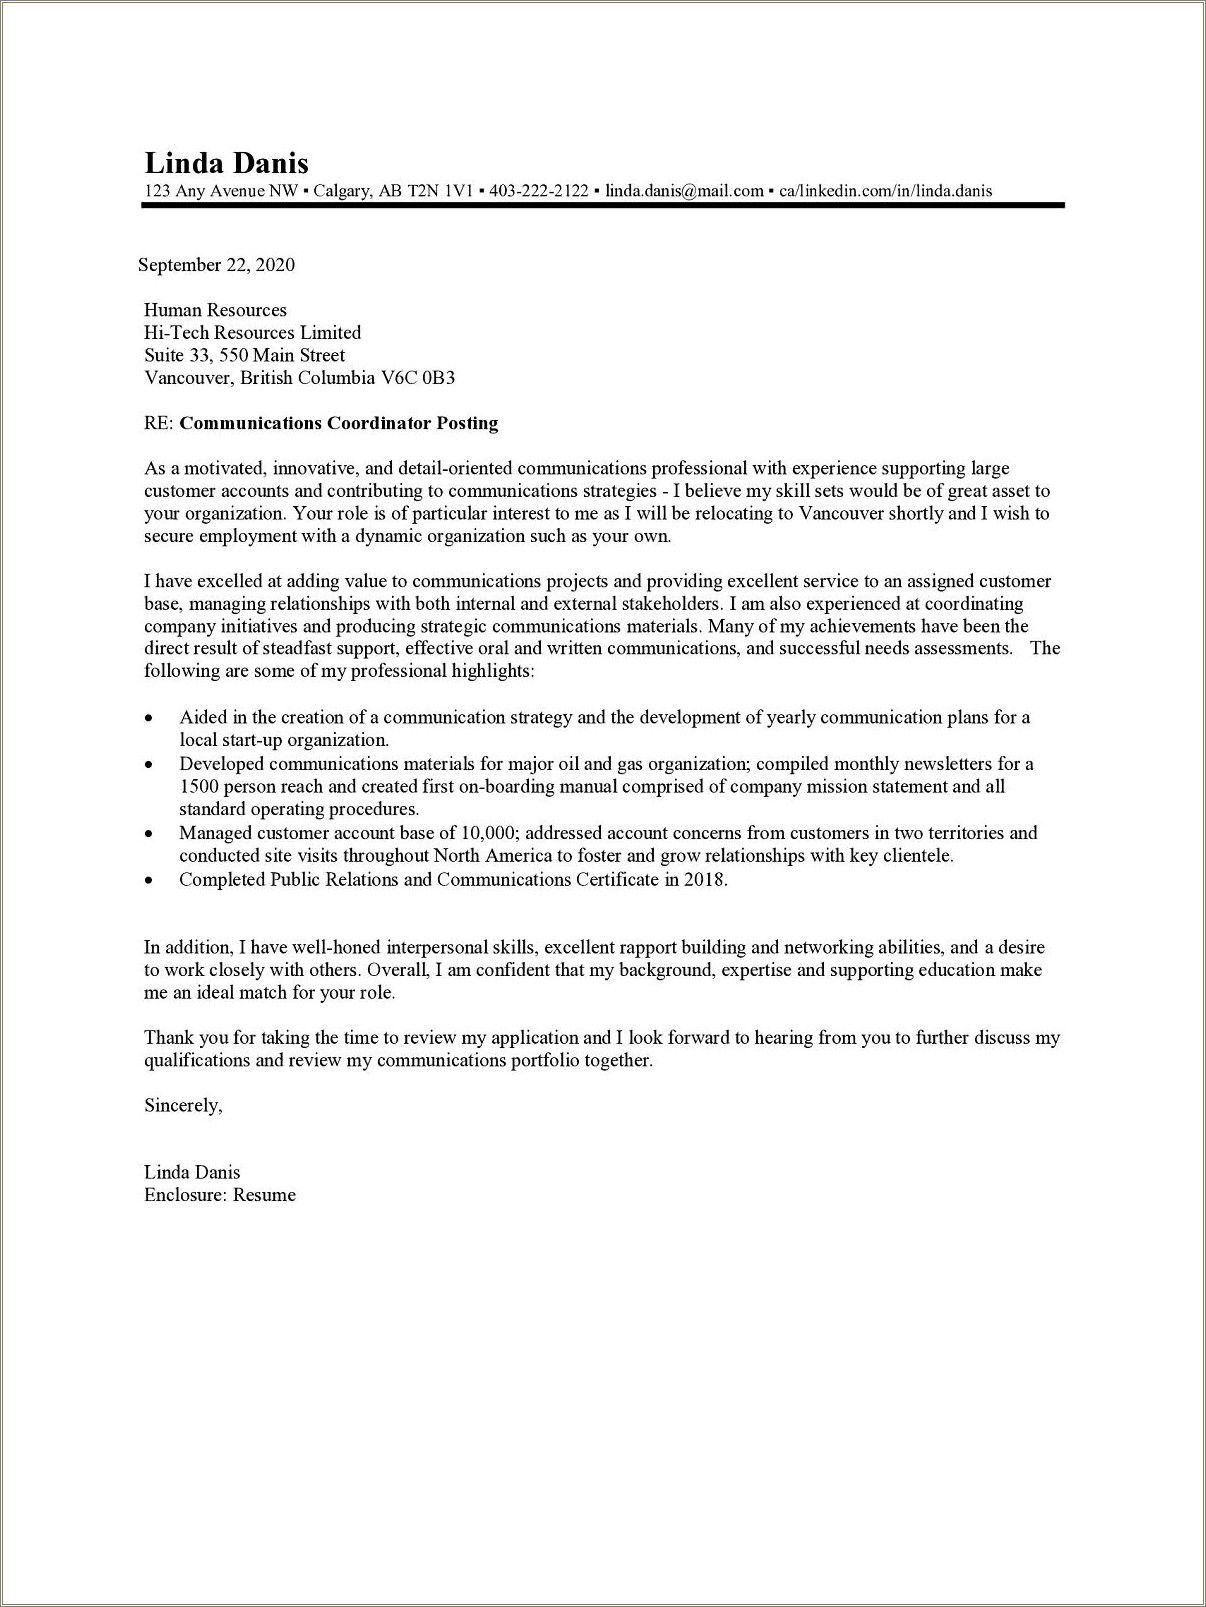 Resume Cover Letter Examples Looking For New Experieces